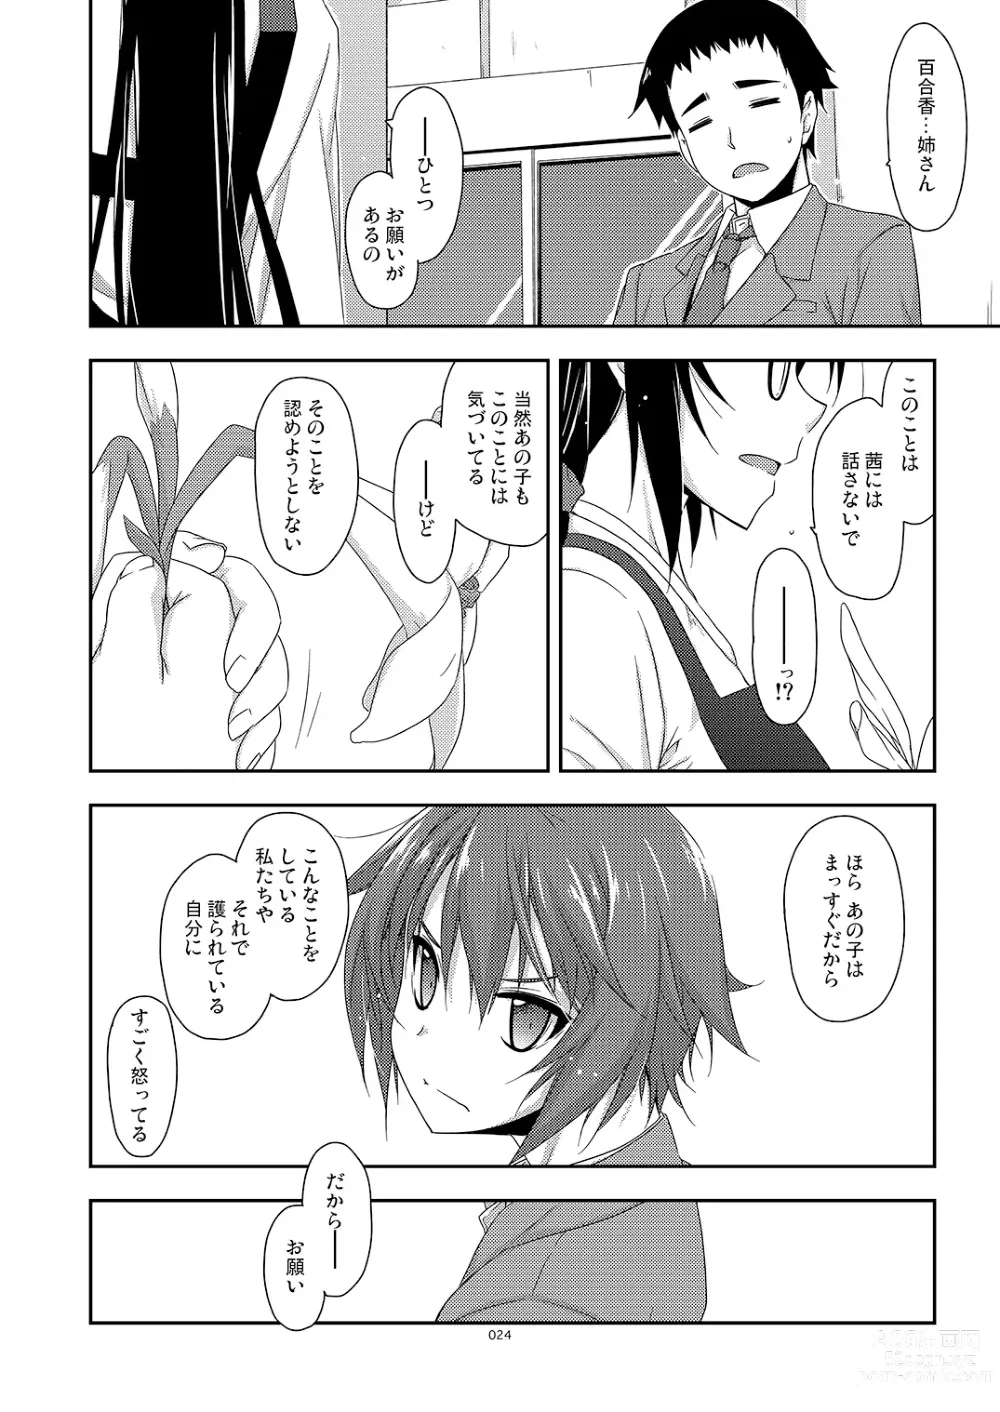 Page 24 of doujinshi Rouka Soushuuhen - Tinkered Flower Perfect Collection